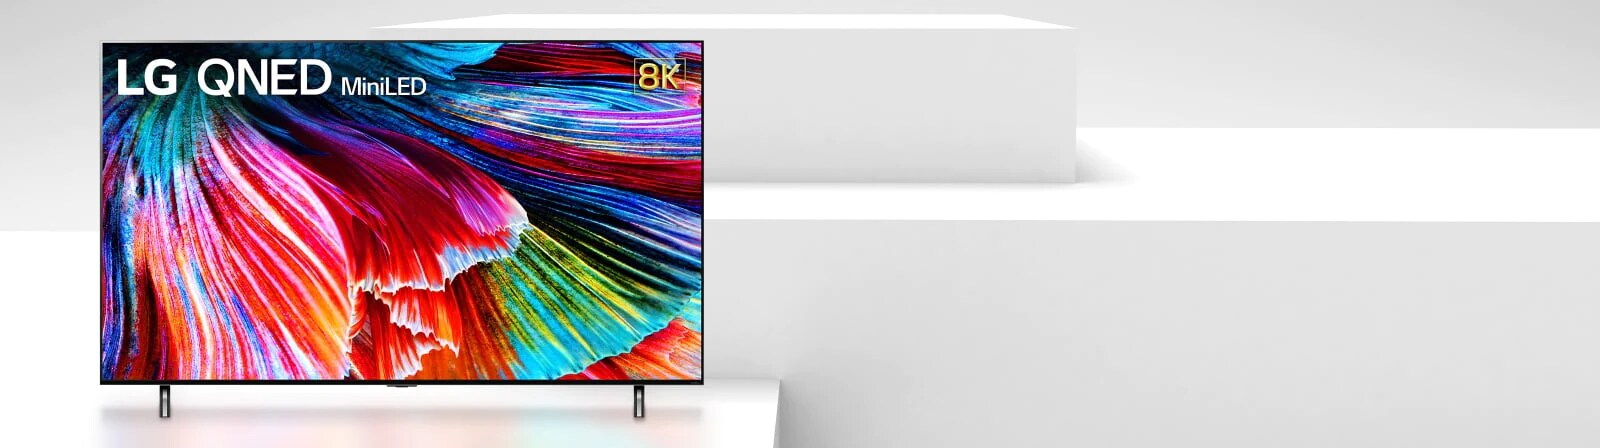 QNED miniLED TV with colorful infill